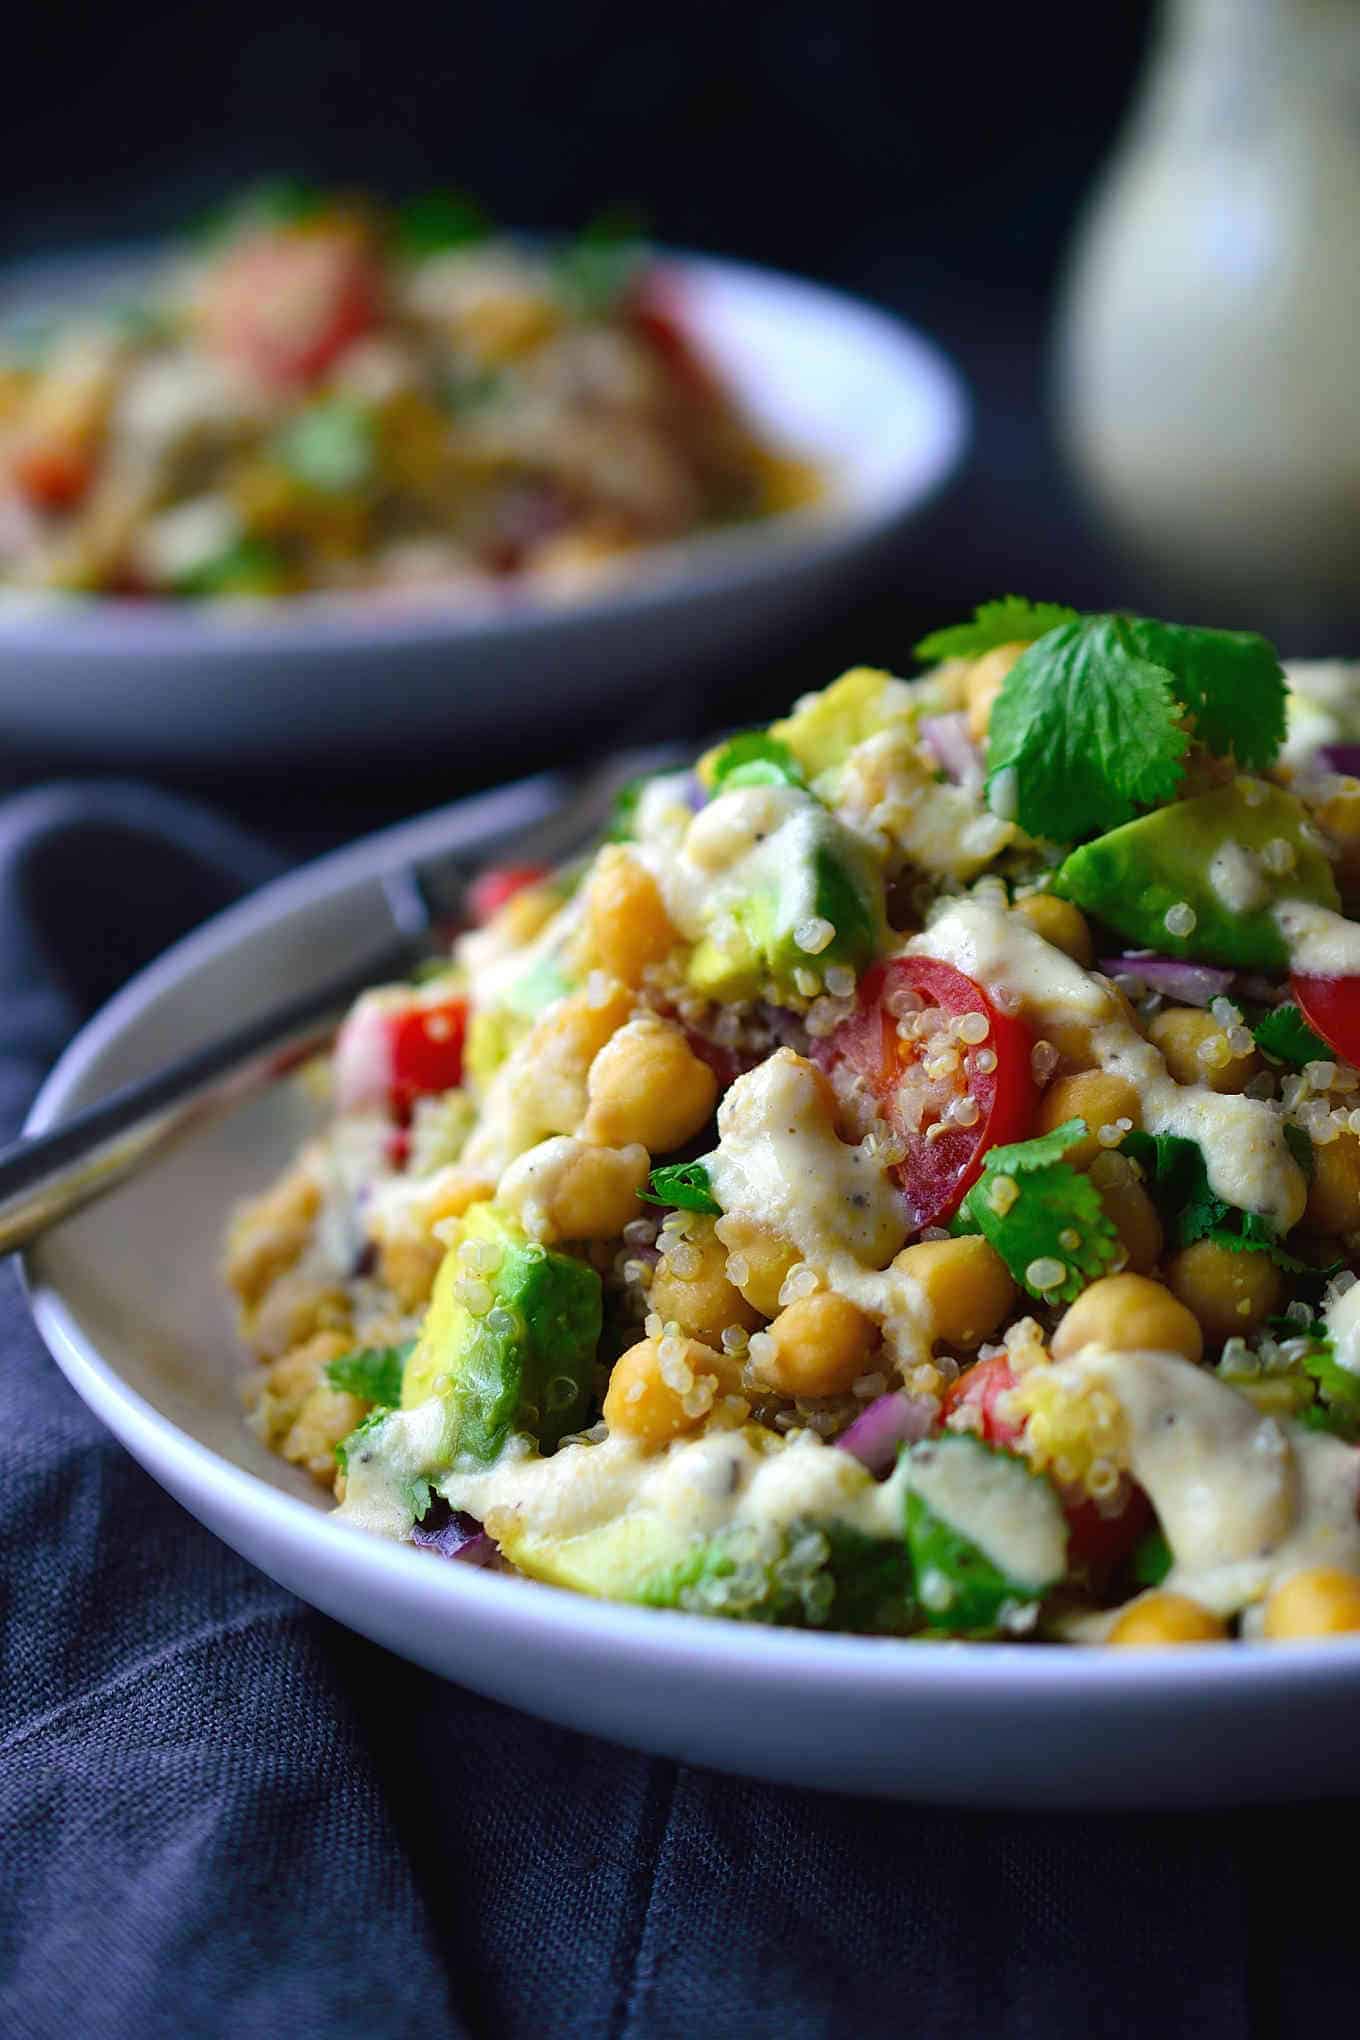 This chickpea avocado salad is super easy to make and great for a weekday lunch, side dish or to take to a potluck, picnic or BBQ. You can choose to serve this salad as-is with a squeeze of lemon juice, or whip up a creamy vegan dressing to drizzle over top. Either way it’s a hearty, protein-packed and delicious salad that will keep you full for hours!